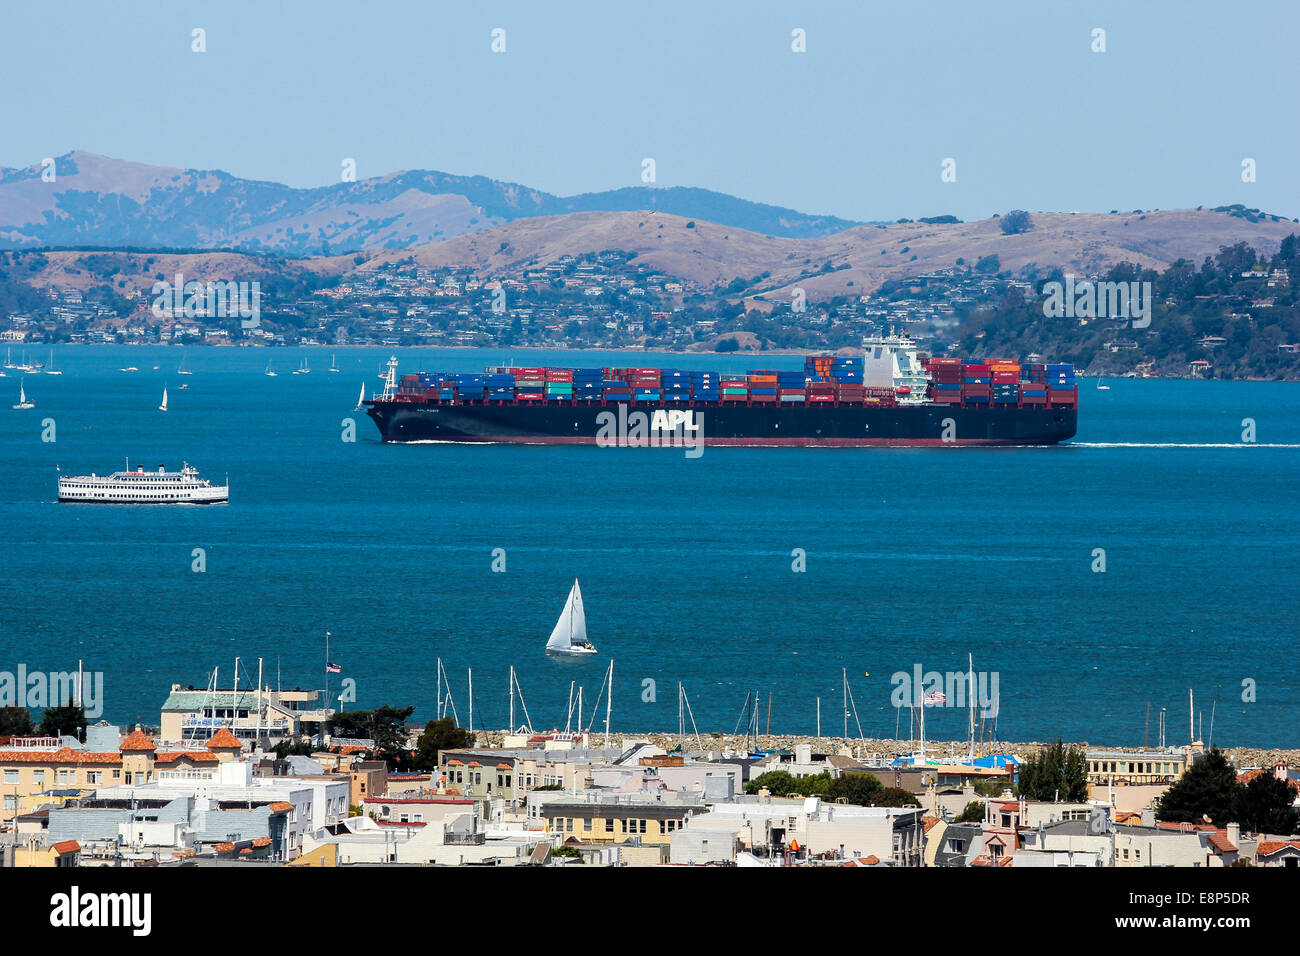 Looking out towards a container ship in San Francisco Bay from the Pacific Heights neighborhood. Stock Photo